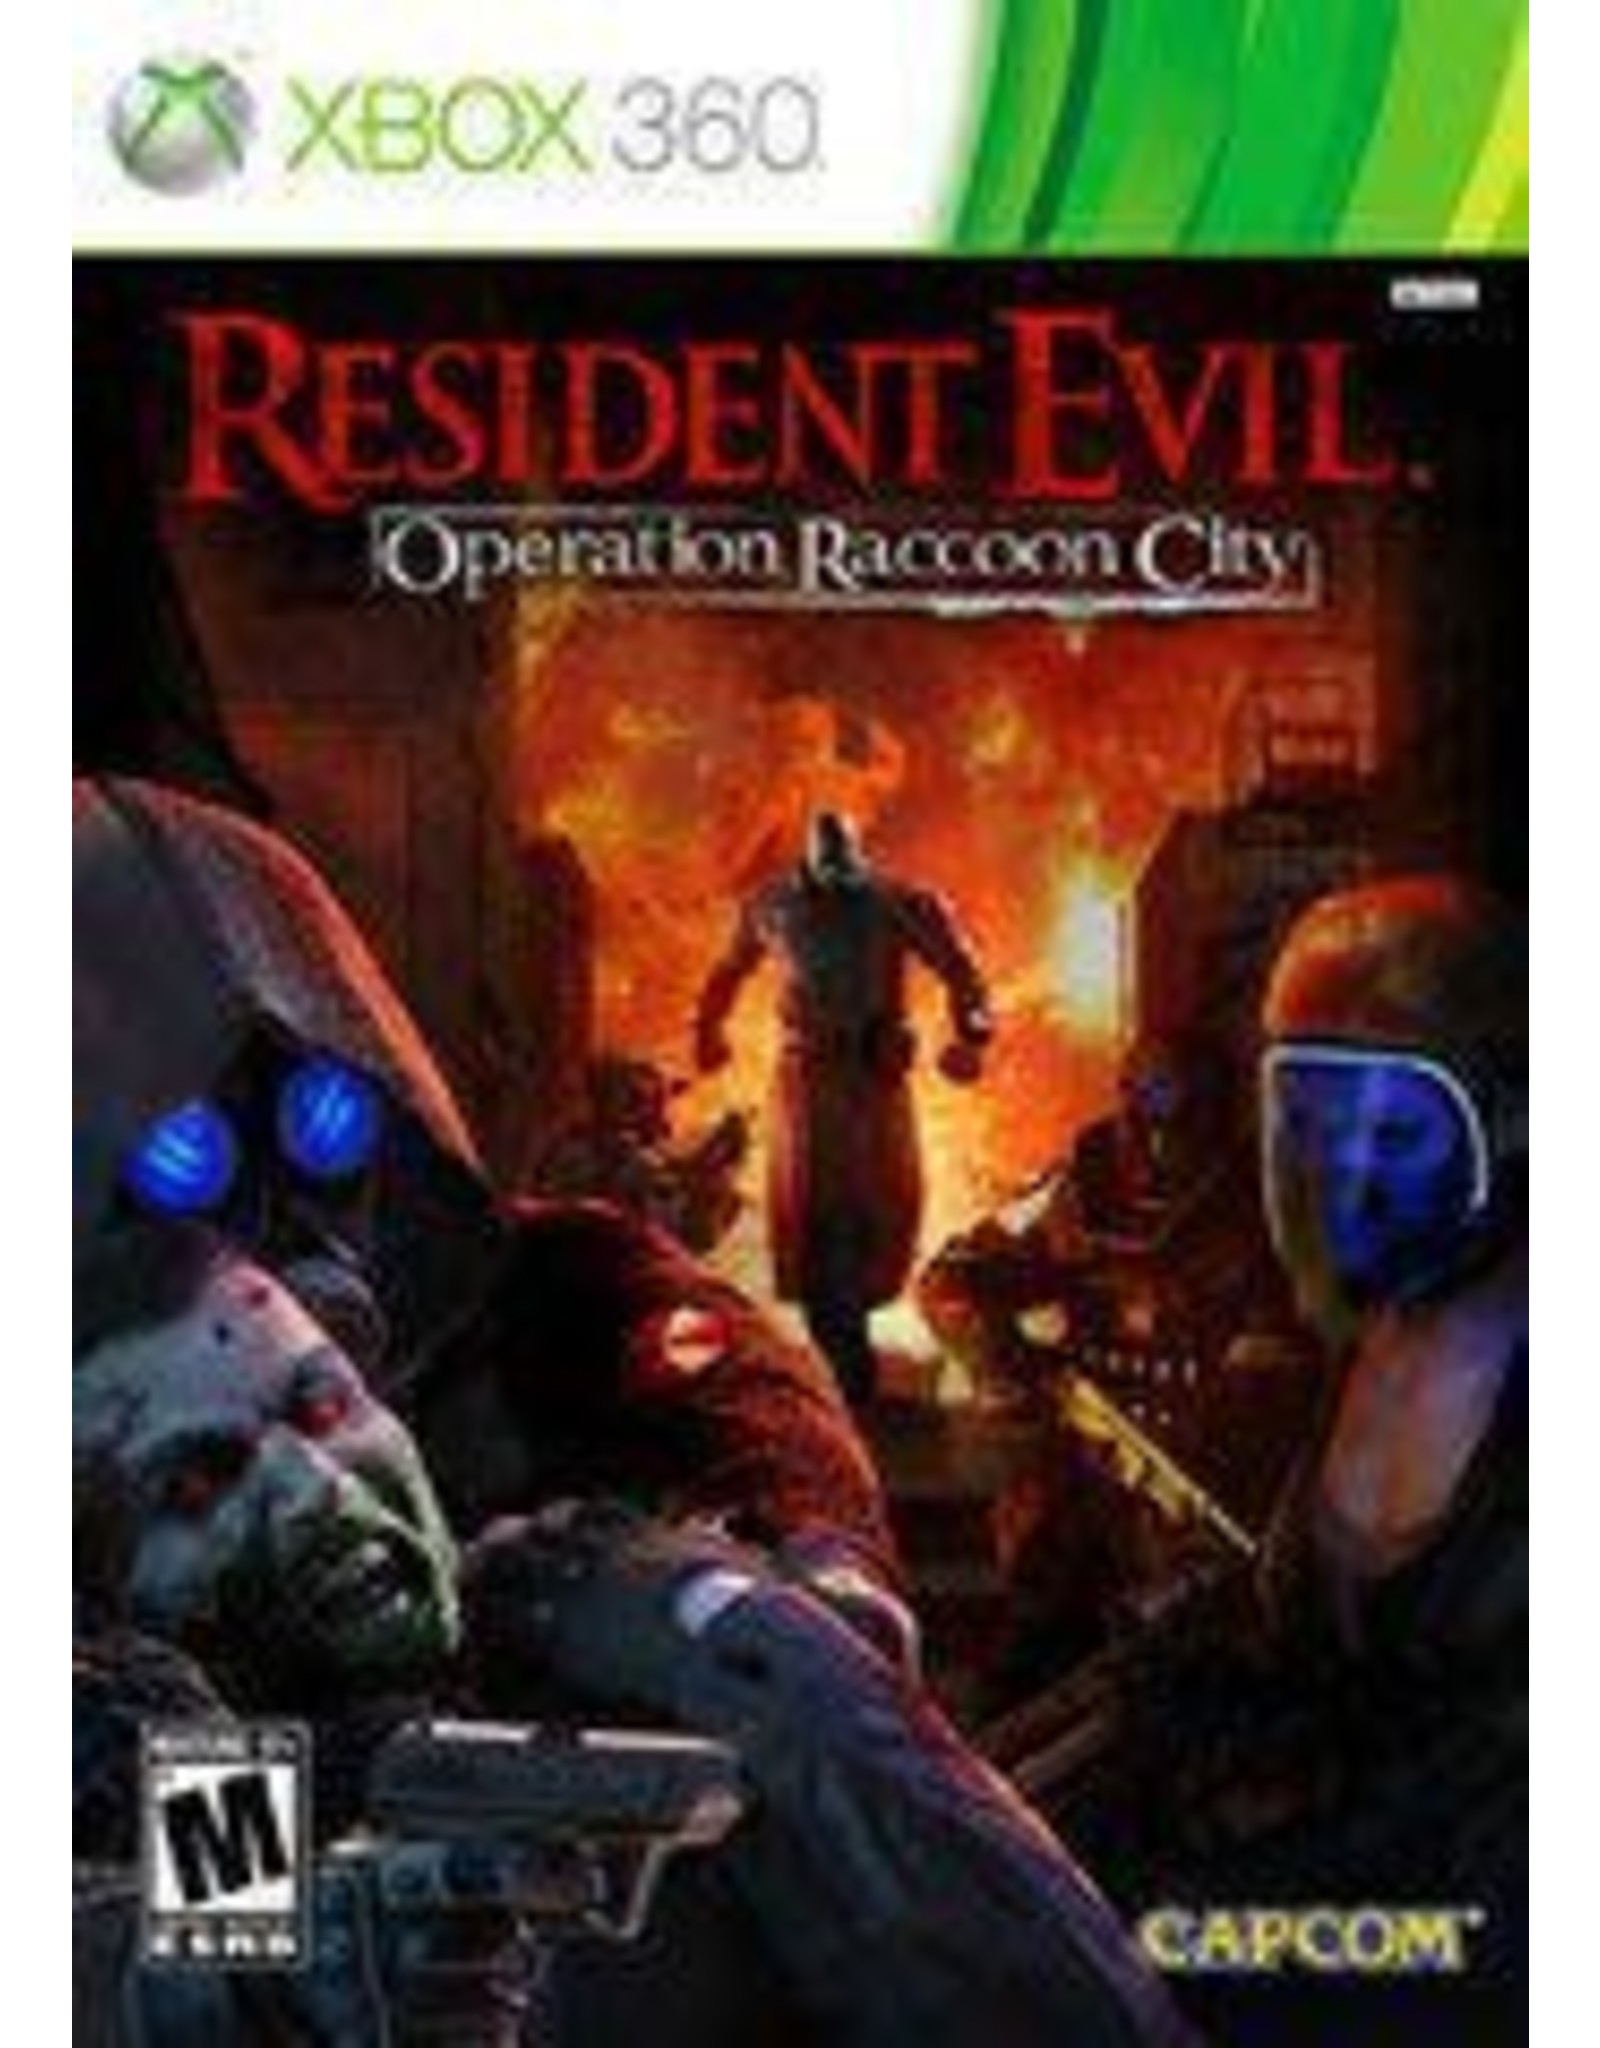 Xbox 360 Resident Evil: Operation Raccoon City (Used)